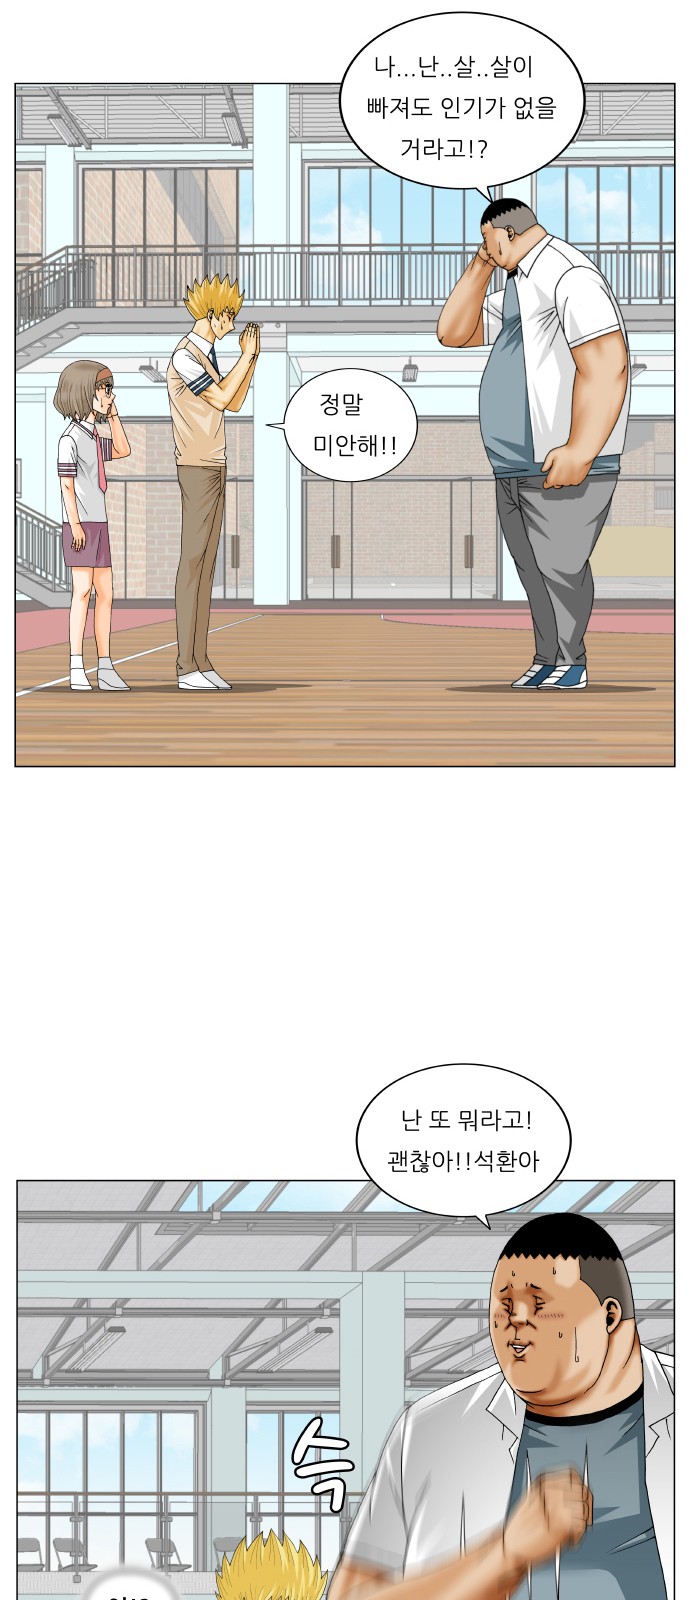 Ultimate Legend - Kang Hae Hyo - Chapter 247 - Page 2